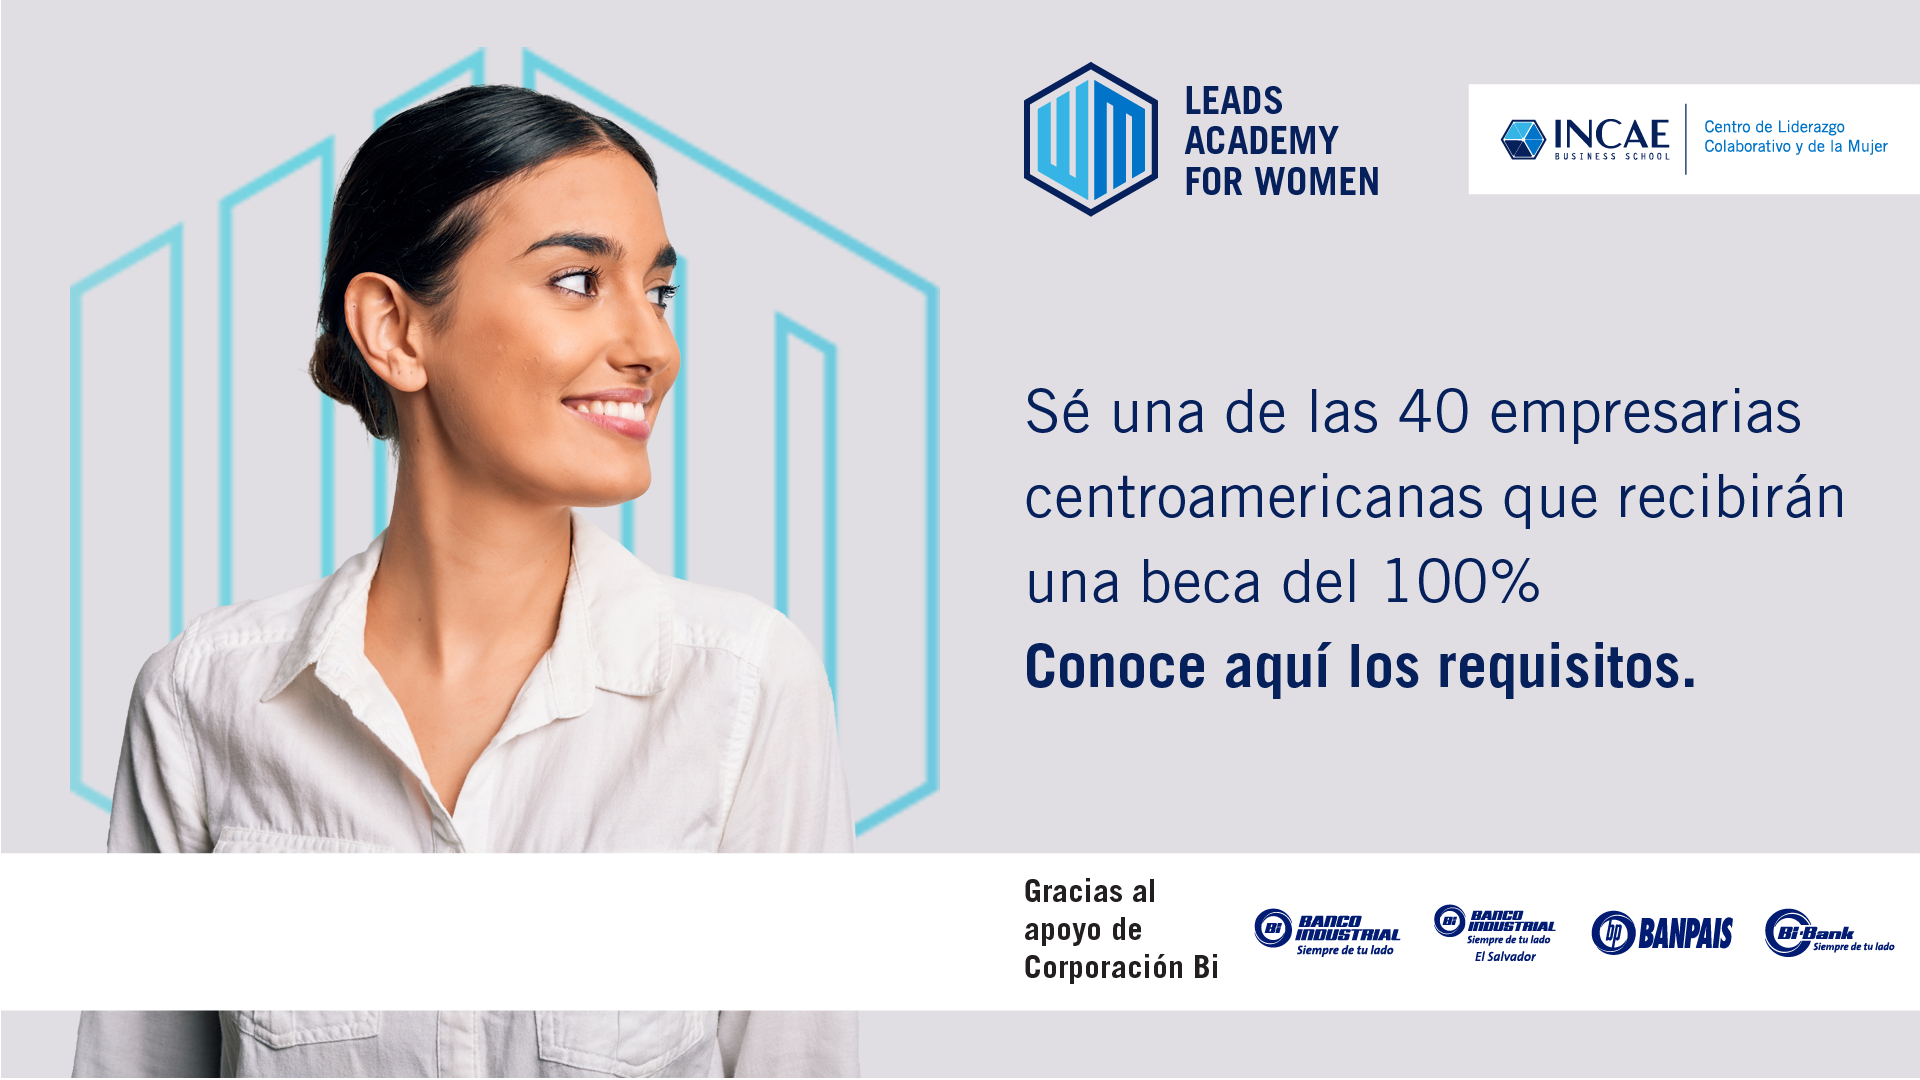 Leads Academy for Women